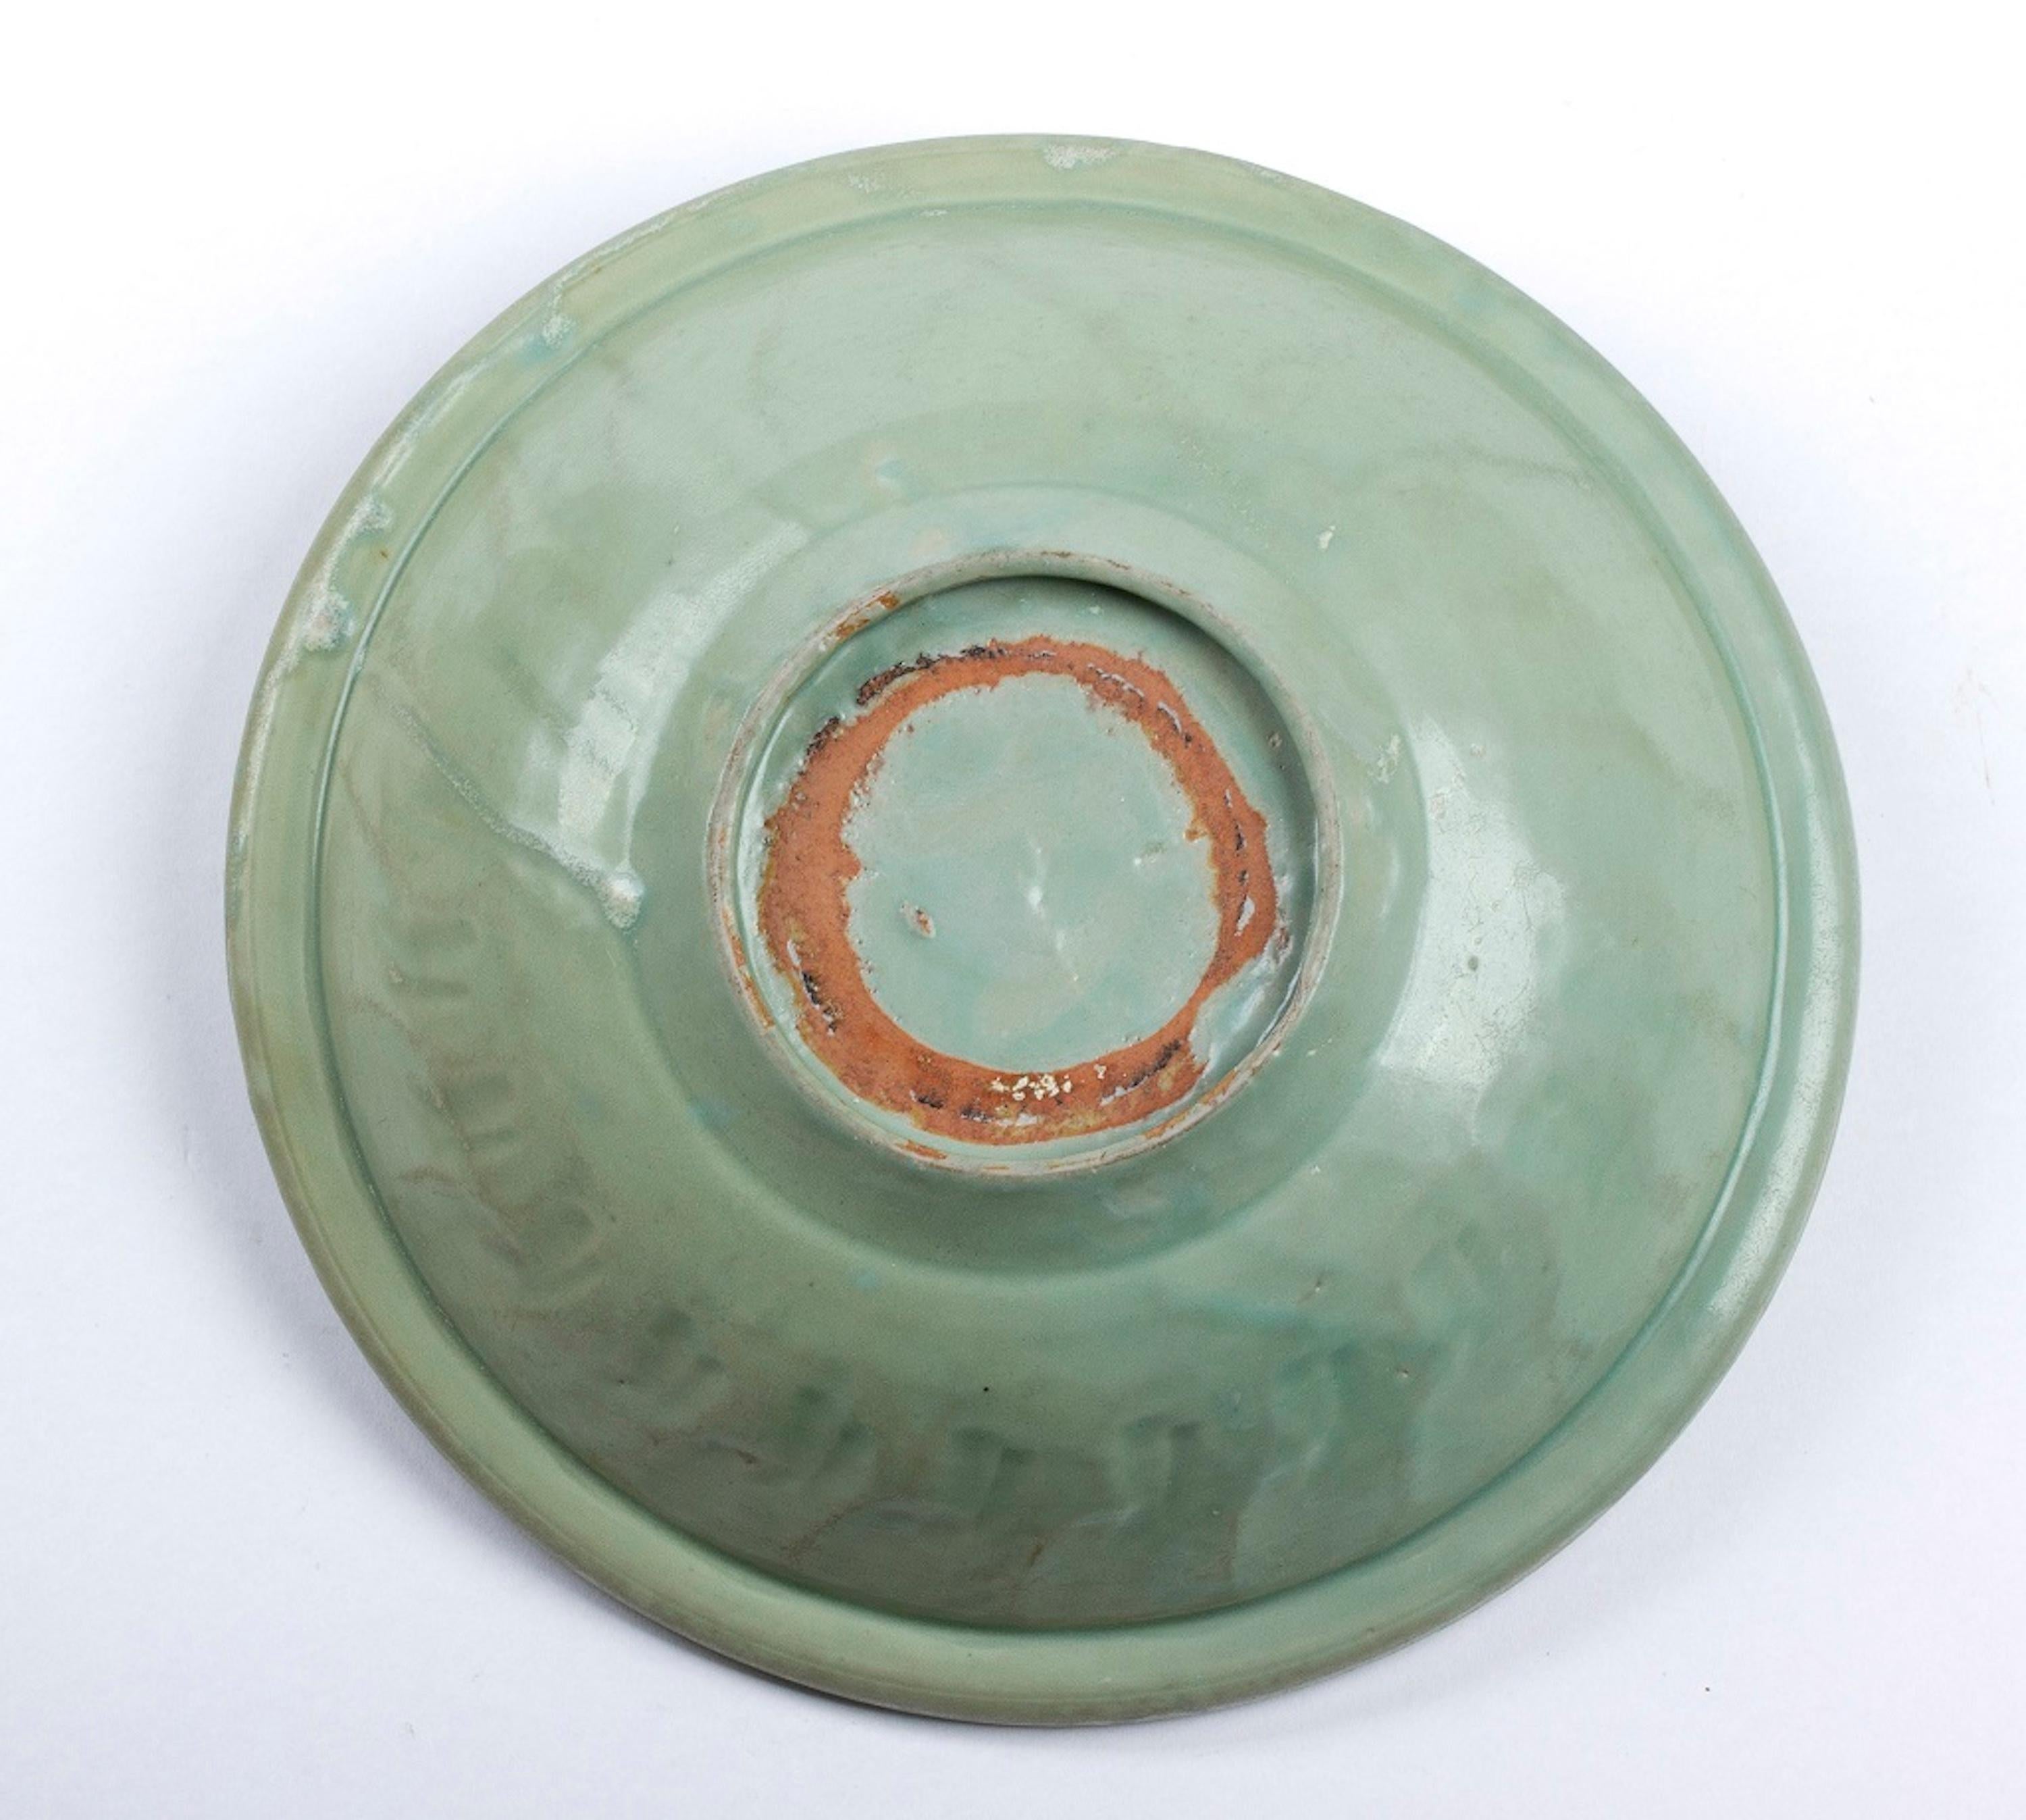 Glazed ceramic dish is an original artwork realized in China during the Ming dynasty.

Longquan Céladon glazed ceramics. 

Provenance: Private collection. 

Good conditions. 

The object is an original Longquan Céladon ceramic production.